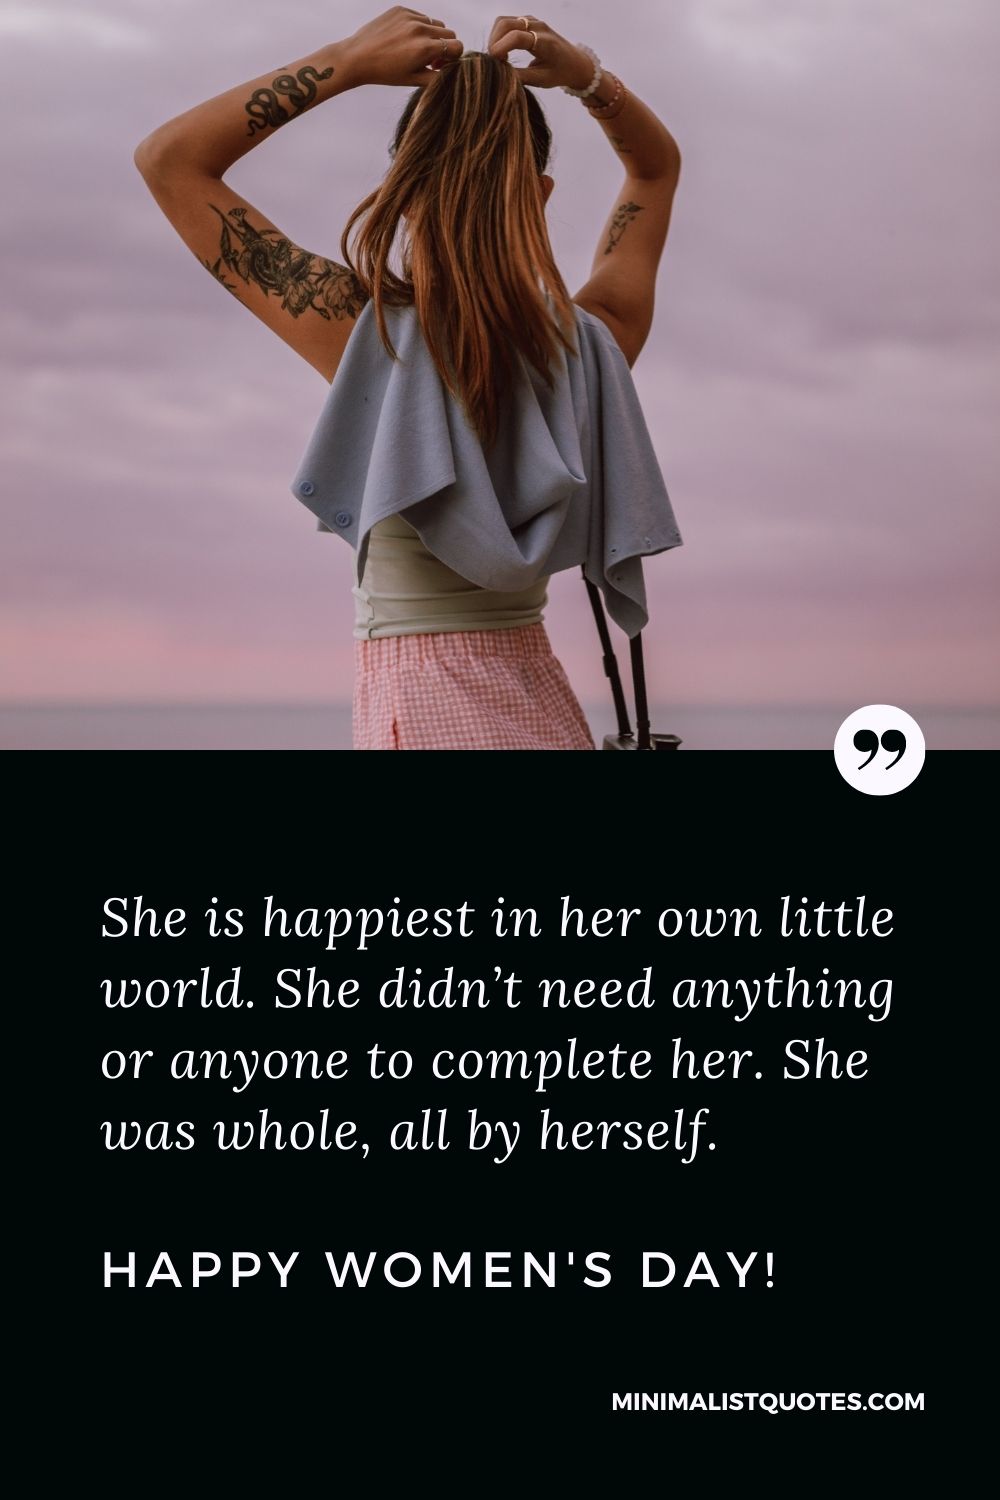 Women's Day Quote, Wish & Message With Image: She is happiest in her own little world. She didn’t need anything or anyone to complete her. She was whole, all by herself. Happy Women's Day!